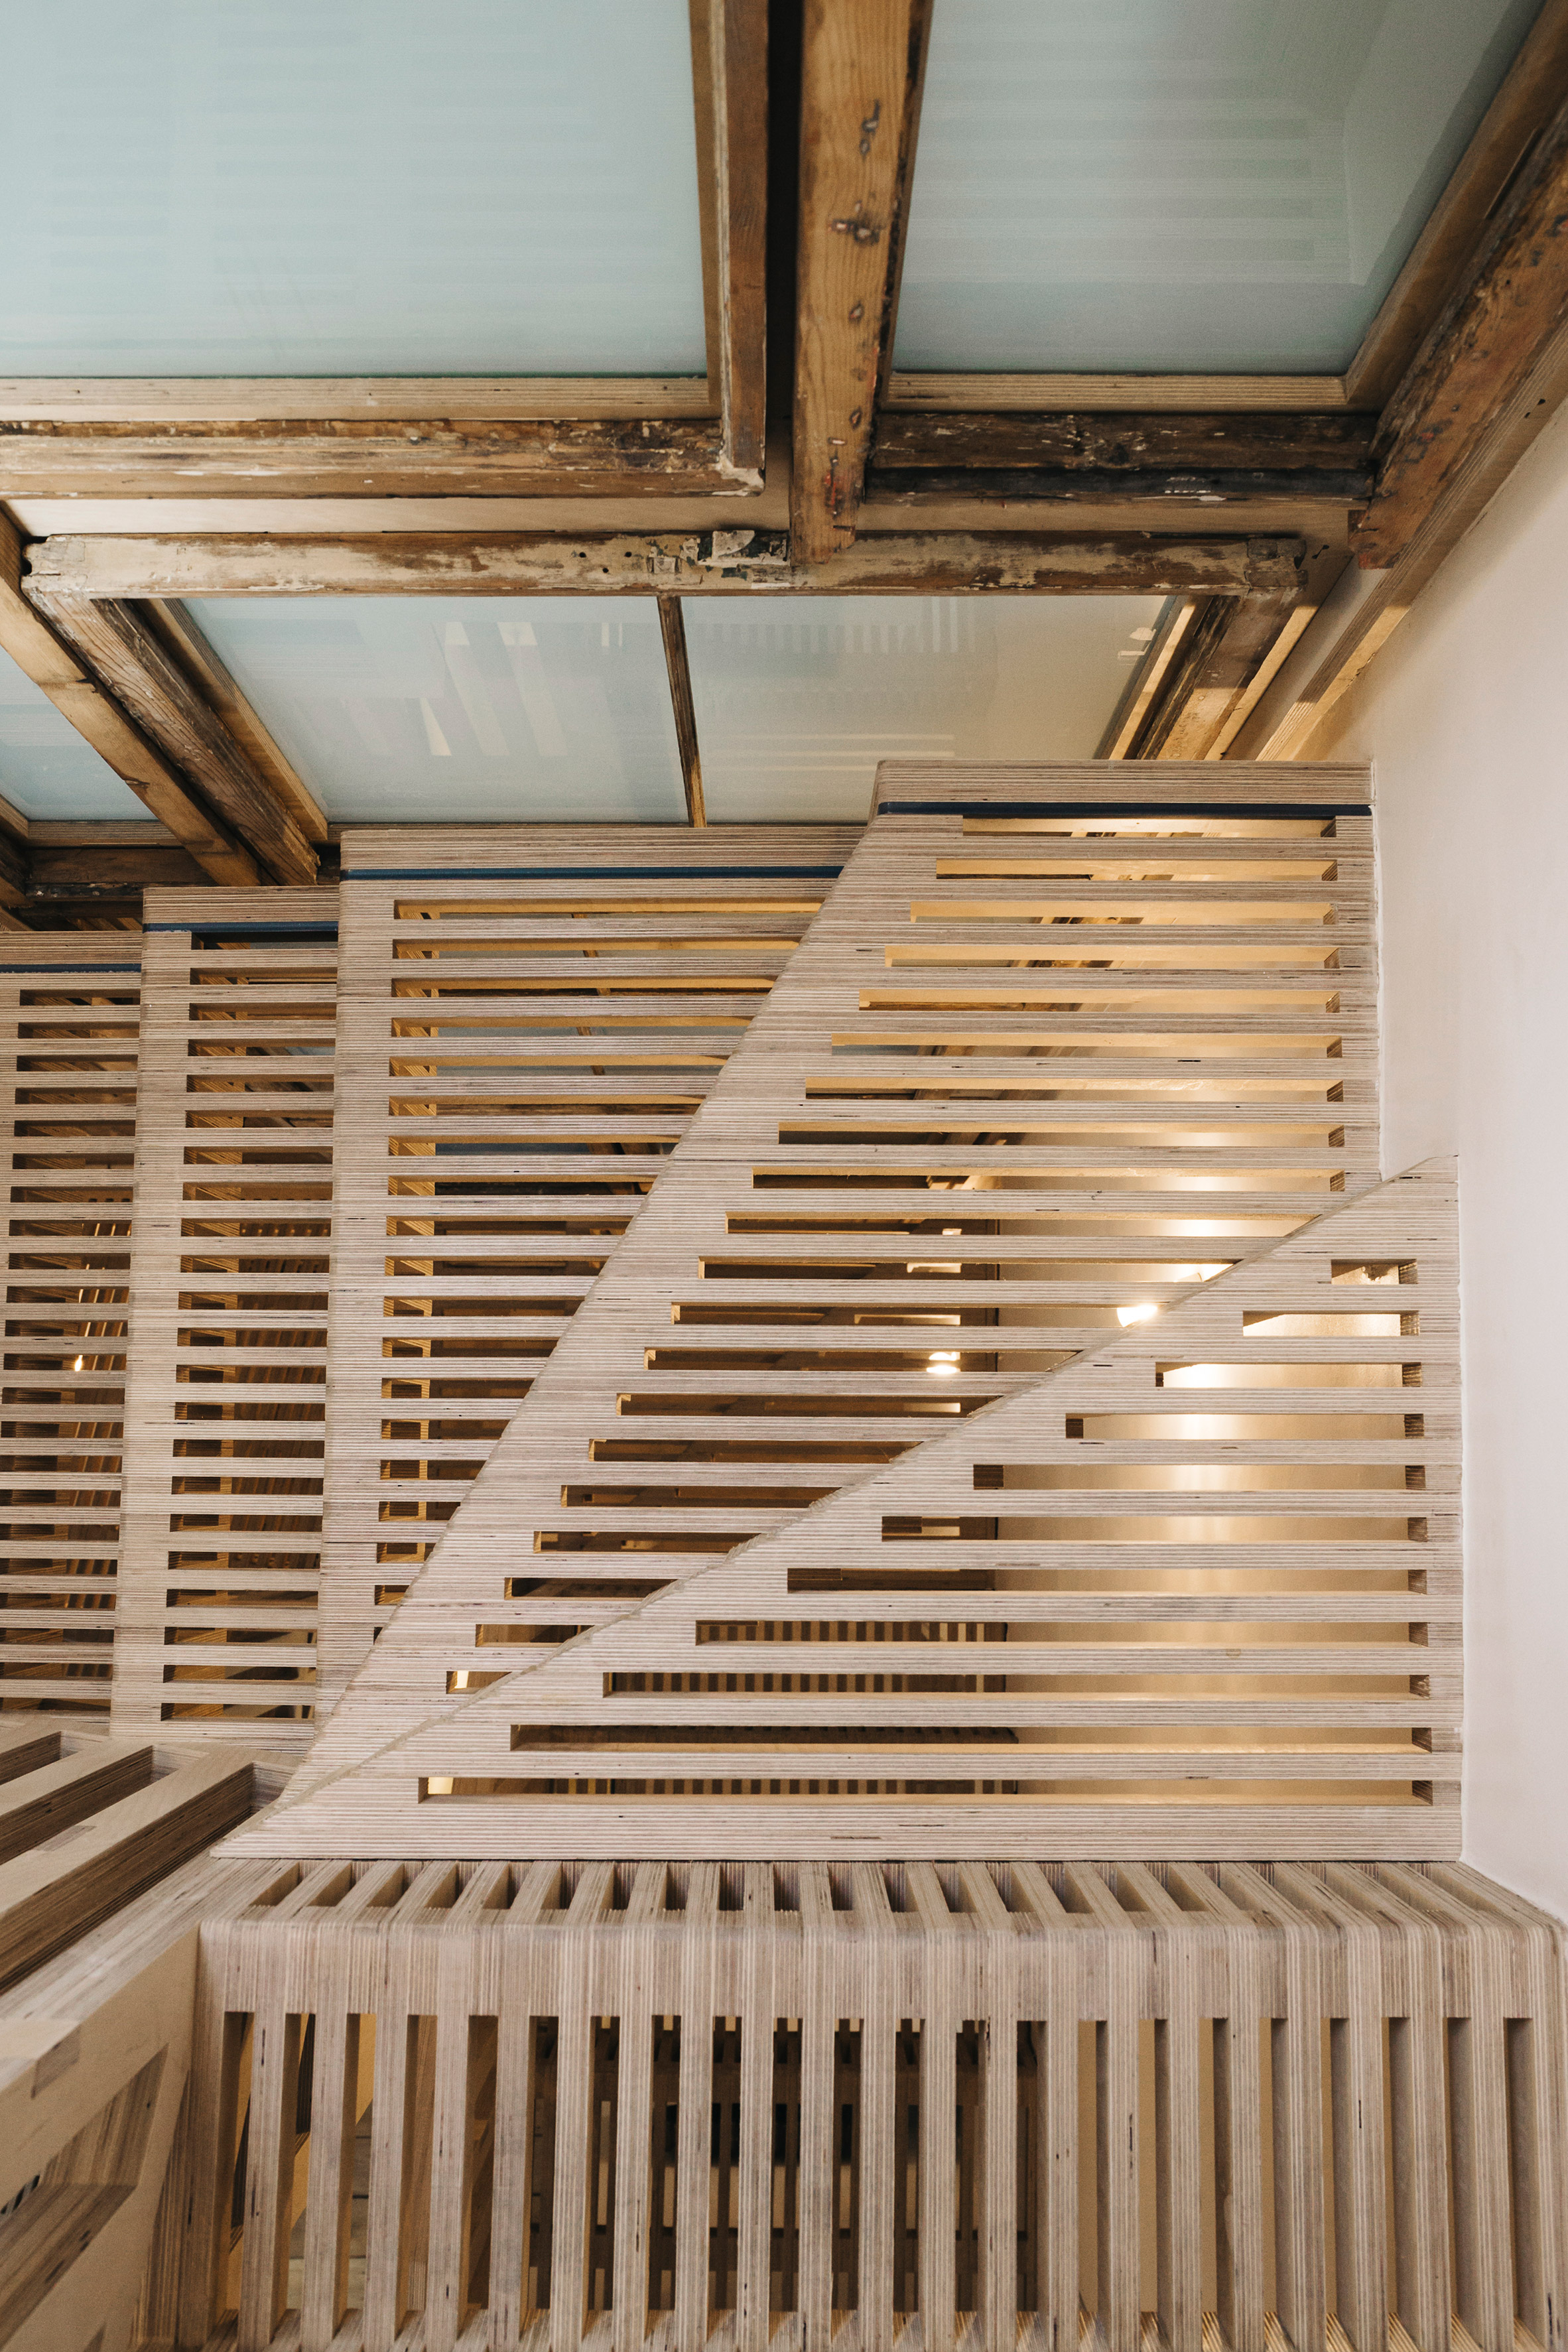 Tsurata Architects designs staircase in London house